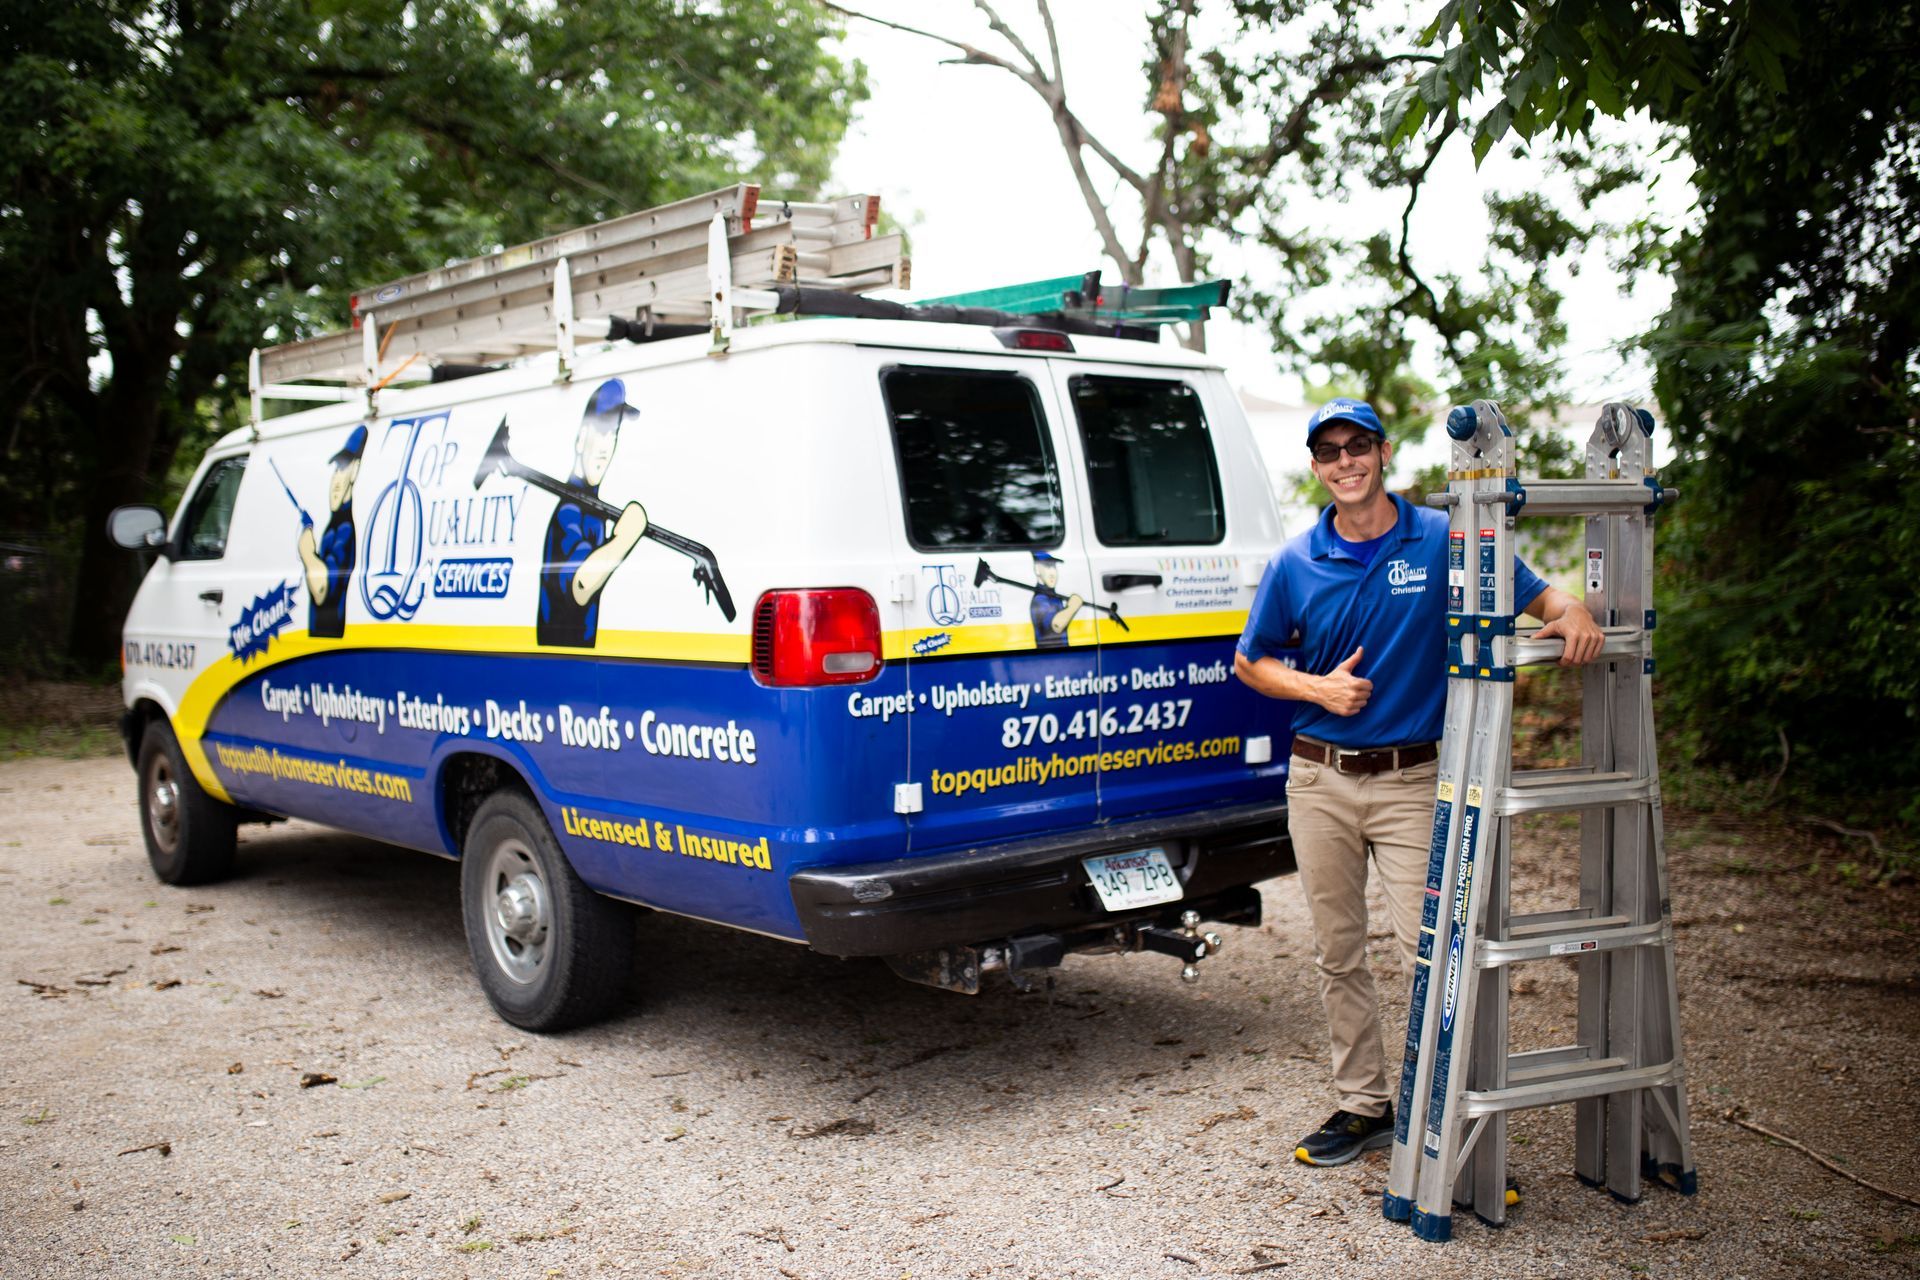 A man is standing next to a ladder in front of a van.